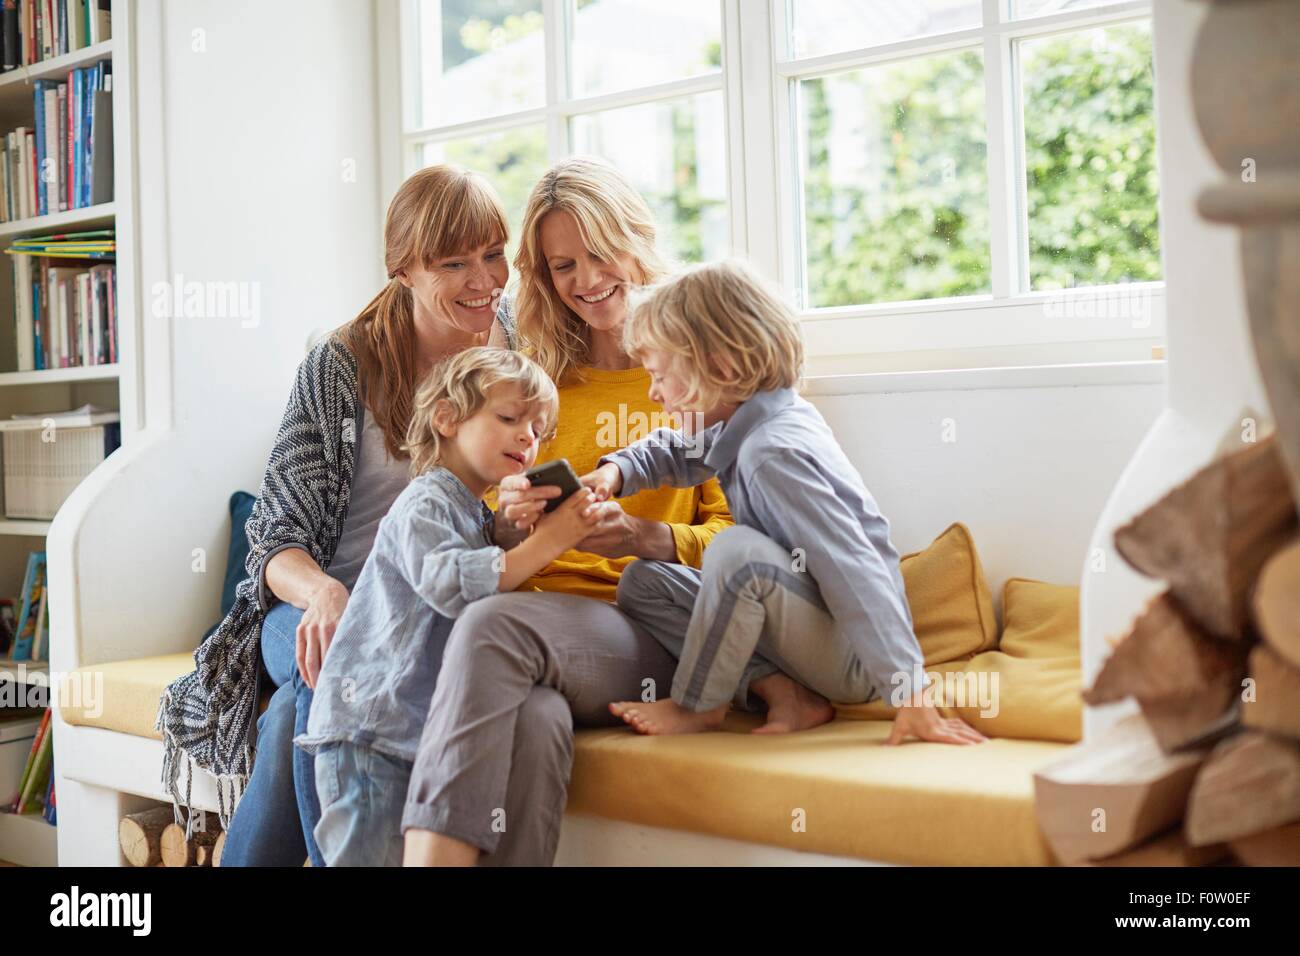 Adult women and boys sitting on window seat looking at smartphone Stock Photo